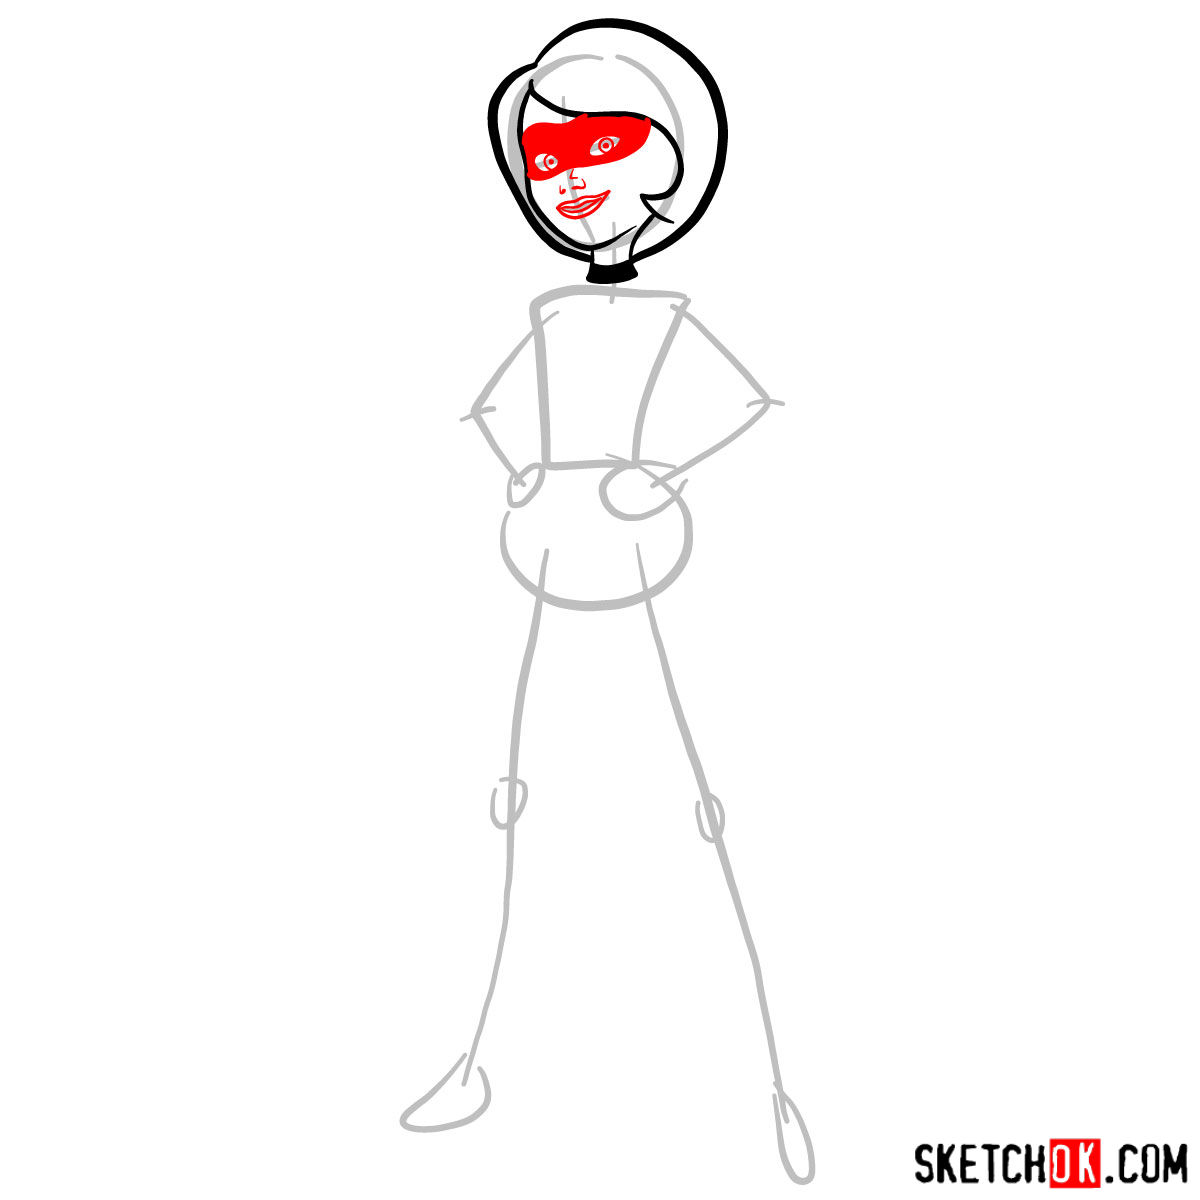 How to draw Elastigirl from The Incredibles - step 04